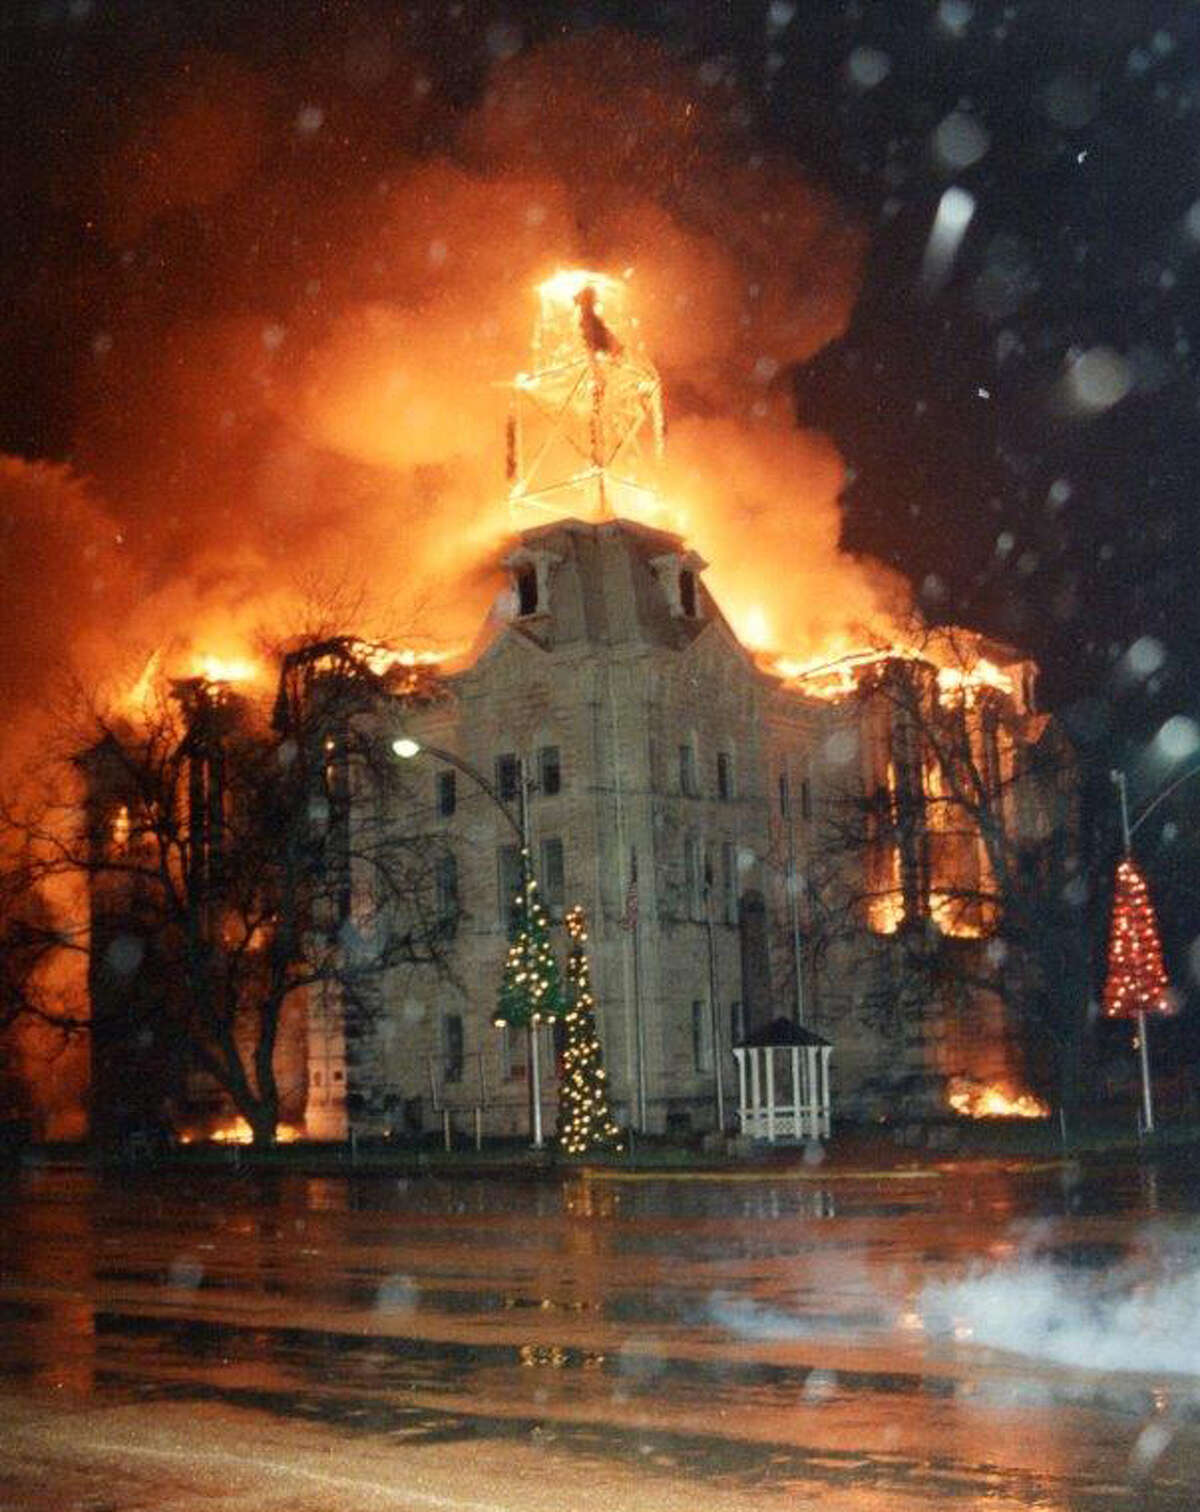 The historic Hill County Courthouse went up in flames on New Year's night 1993. Residents resolved to restore the courthouse and their community's purpose.